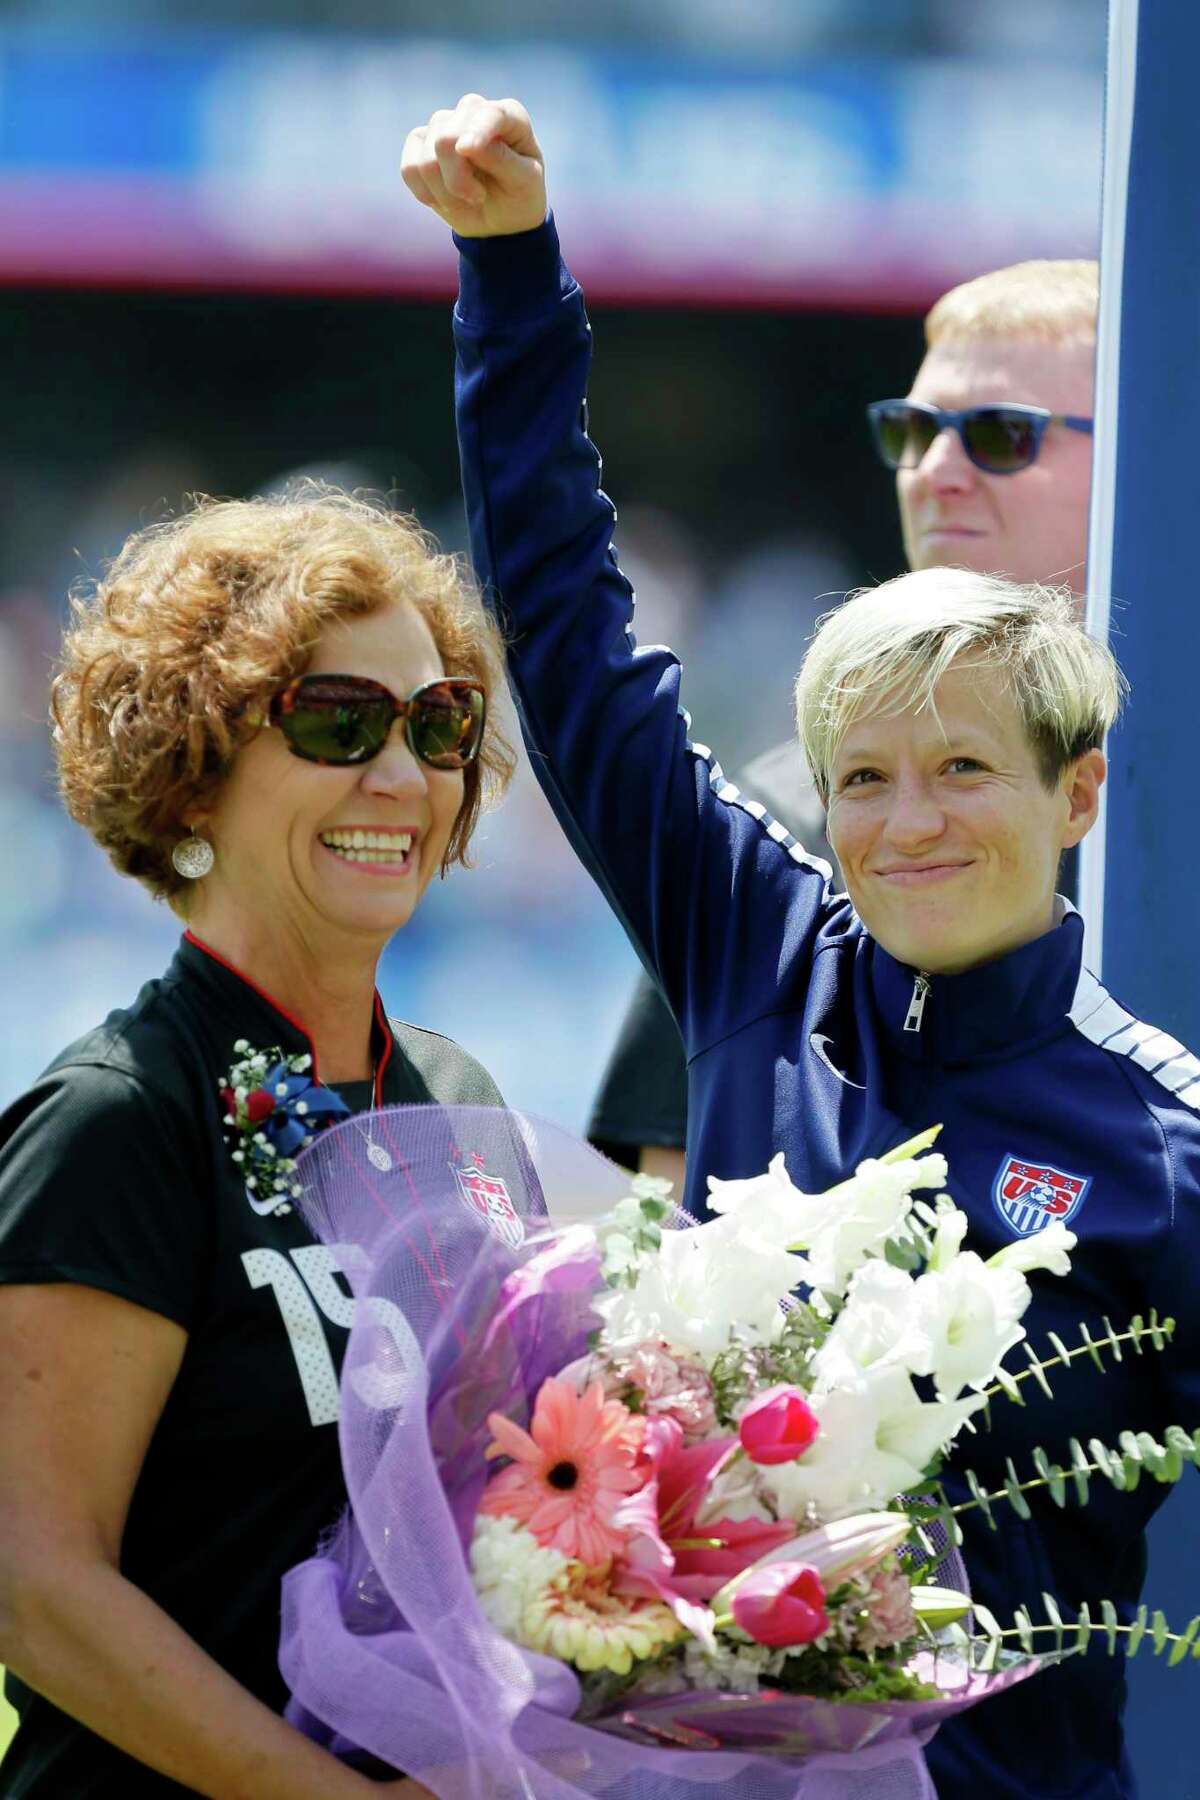 Soccer star Megan Rapinoe of the United States points to her mom, Denise Rapinoe, on Mother's Day during introductions before a friendly match against Ireland on Mother's Day May 10, 2015 at Avaya Stadium in San Jose, California.